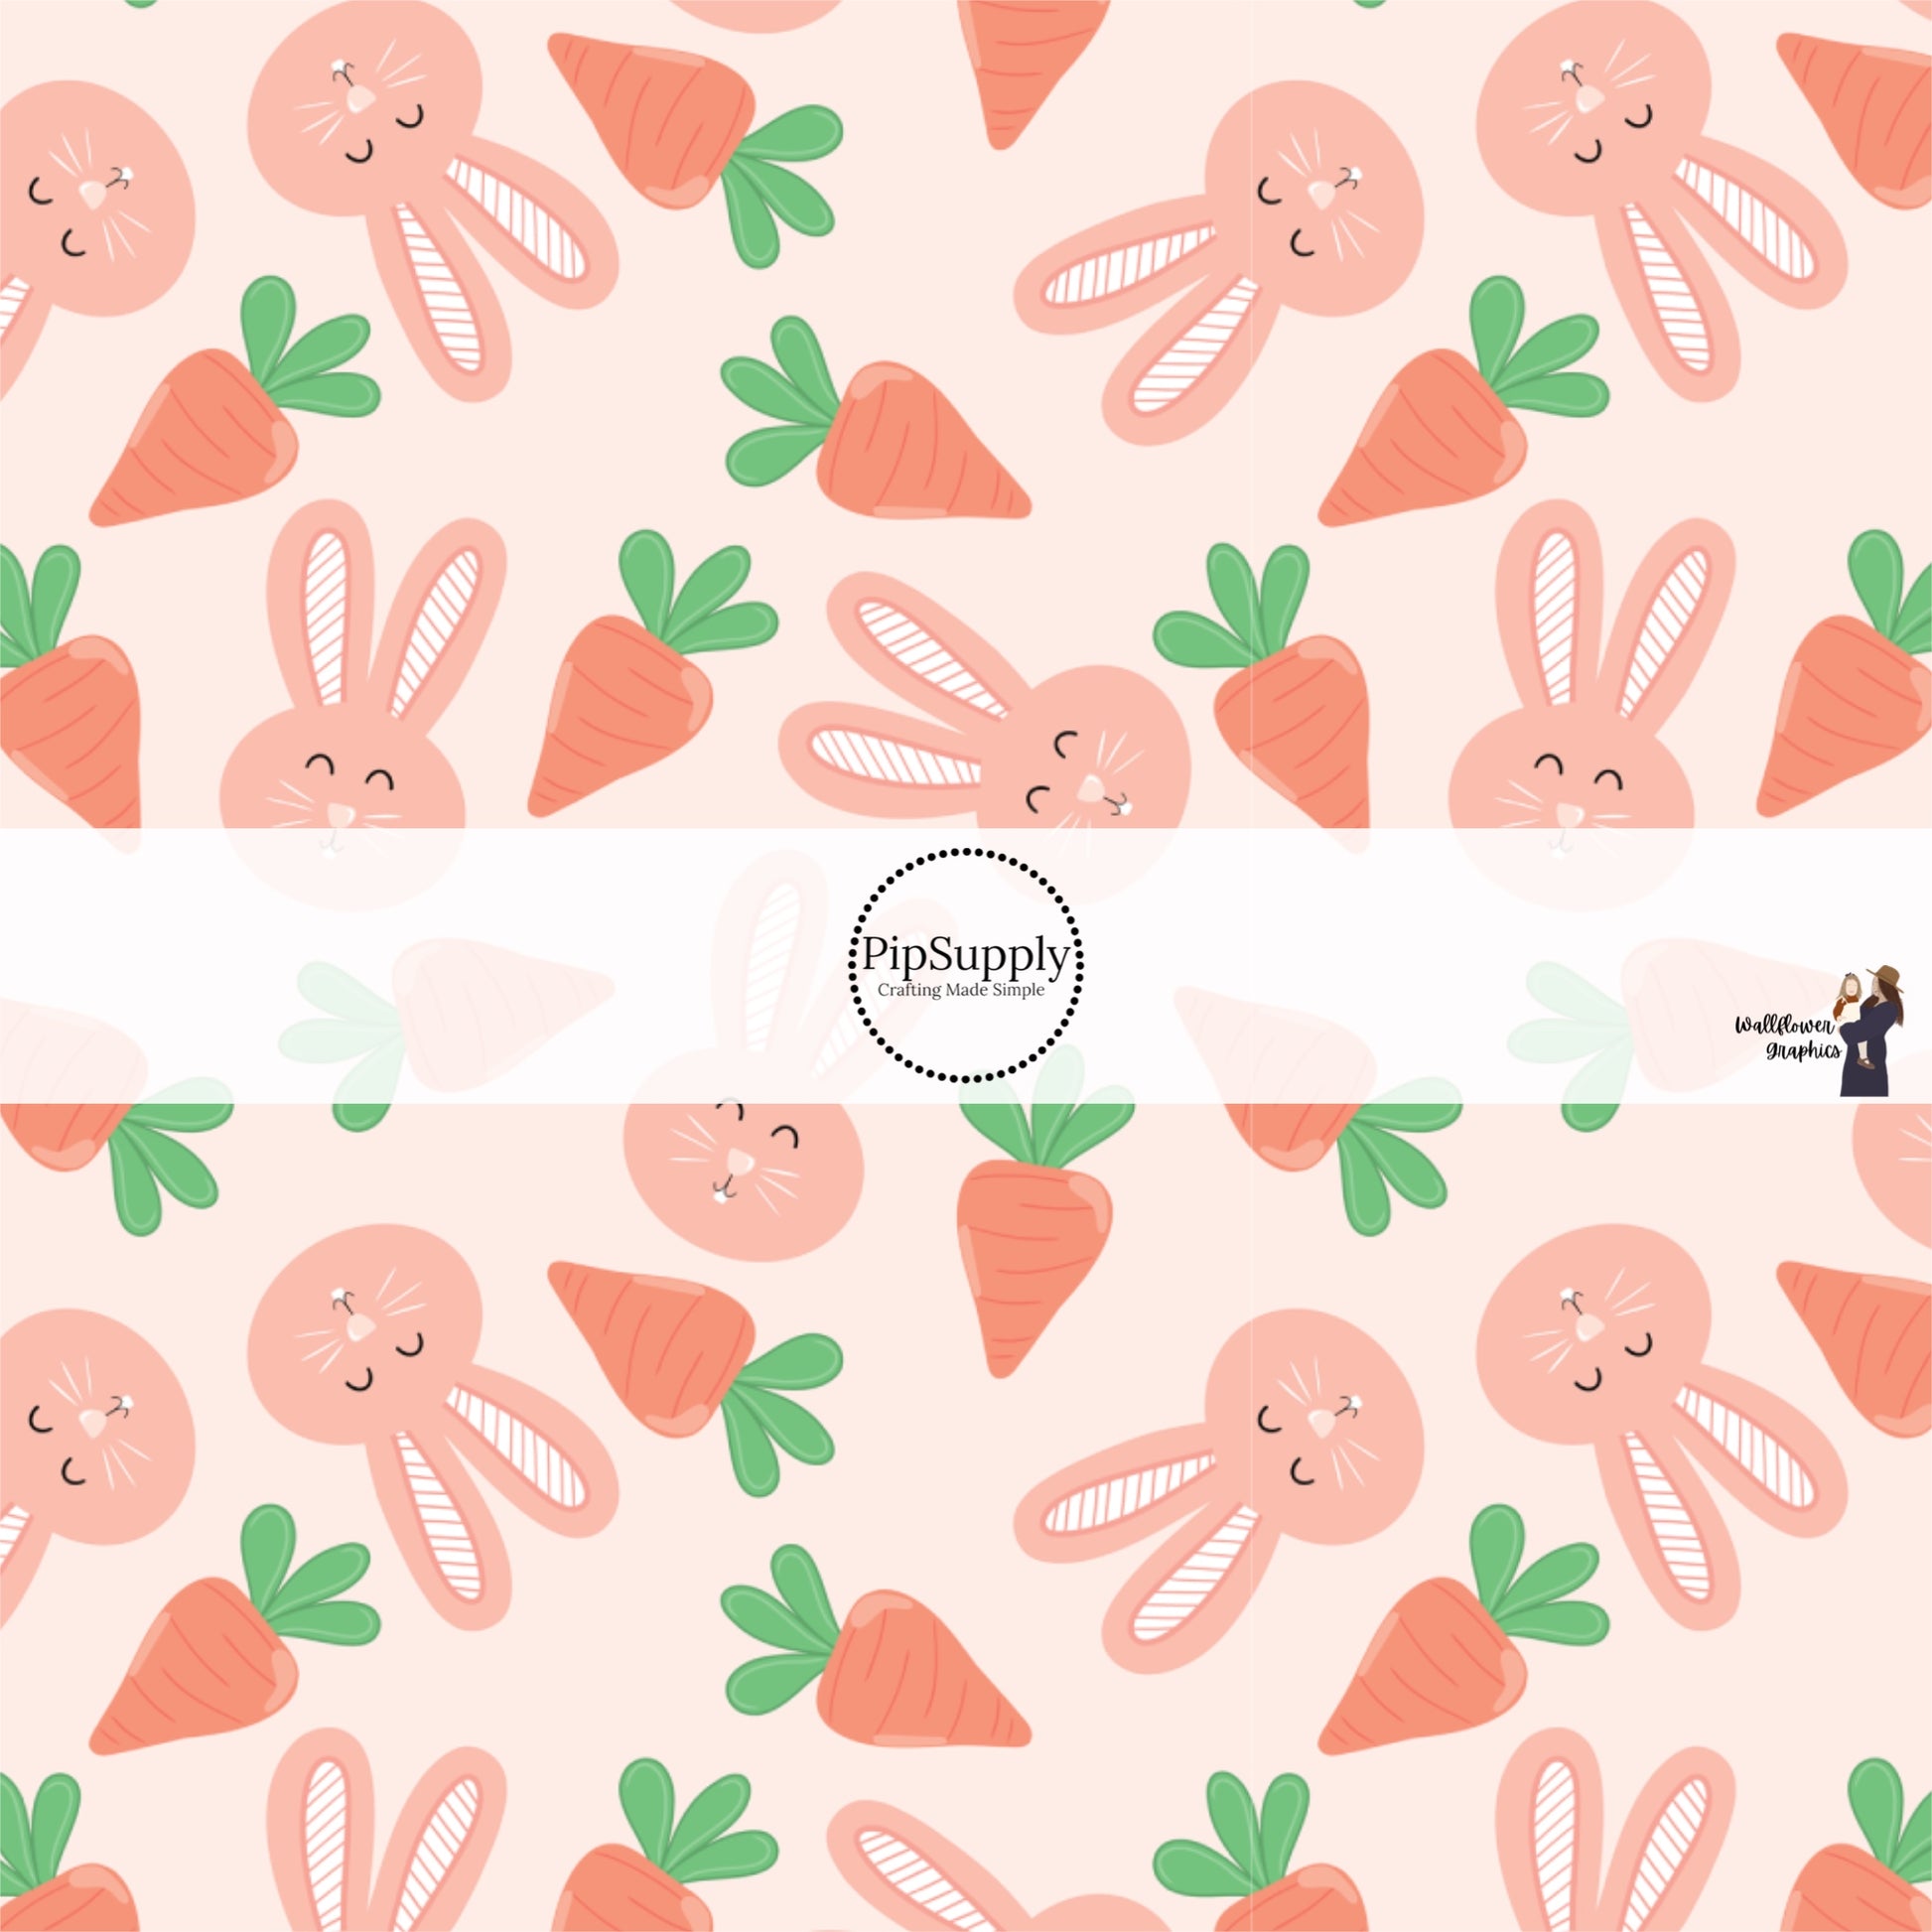 These spring patterned headband kits are easy to assemble and come with everything you need to make your own knotted headband. These kits include a custom printed and sewn fabric strip and a coordinating velvet headband. This cute pattern features bunnies surrounded by carrots on light peach. 